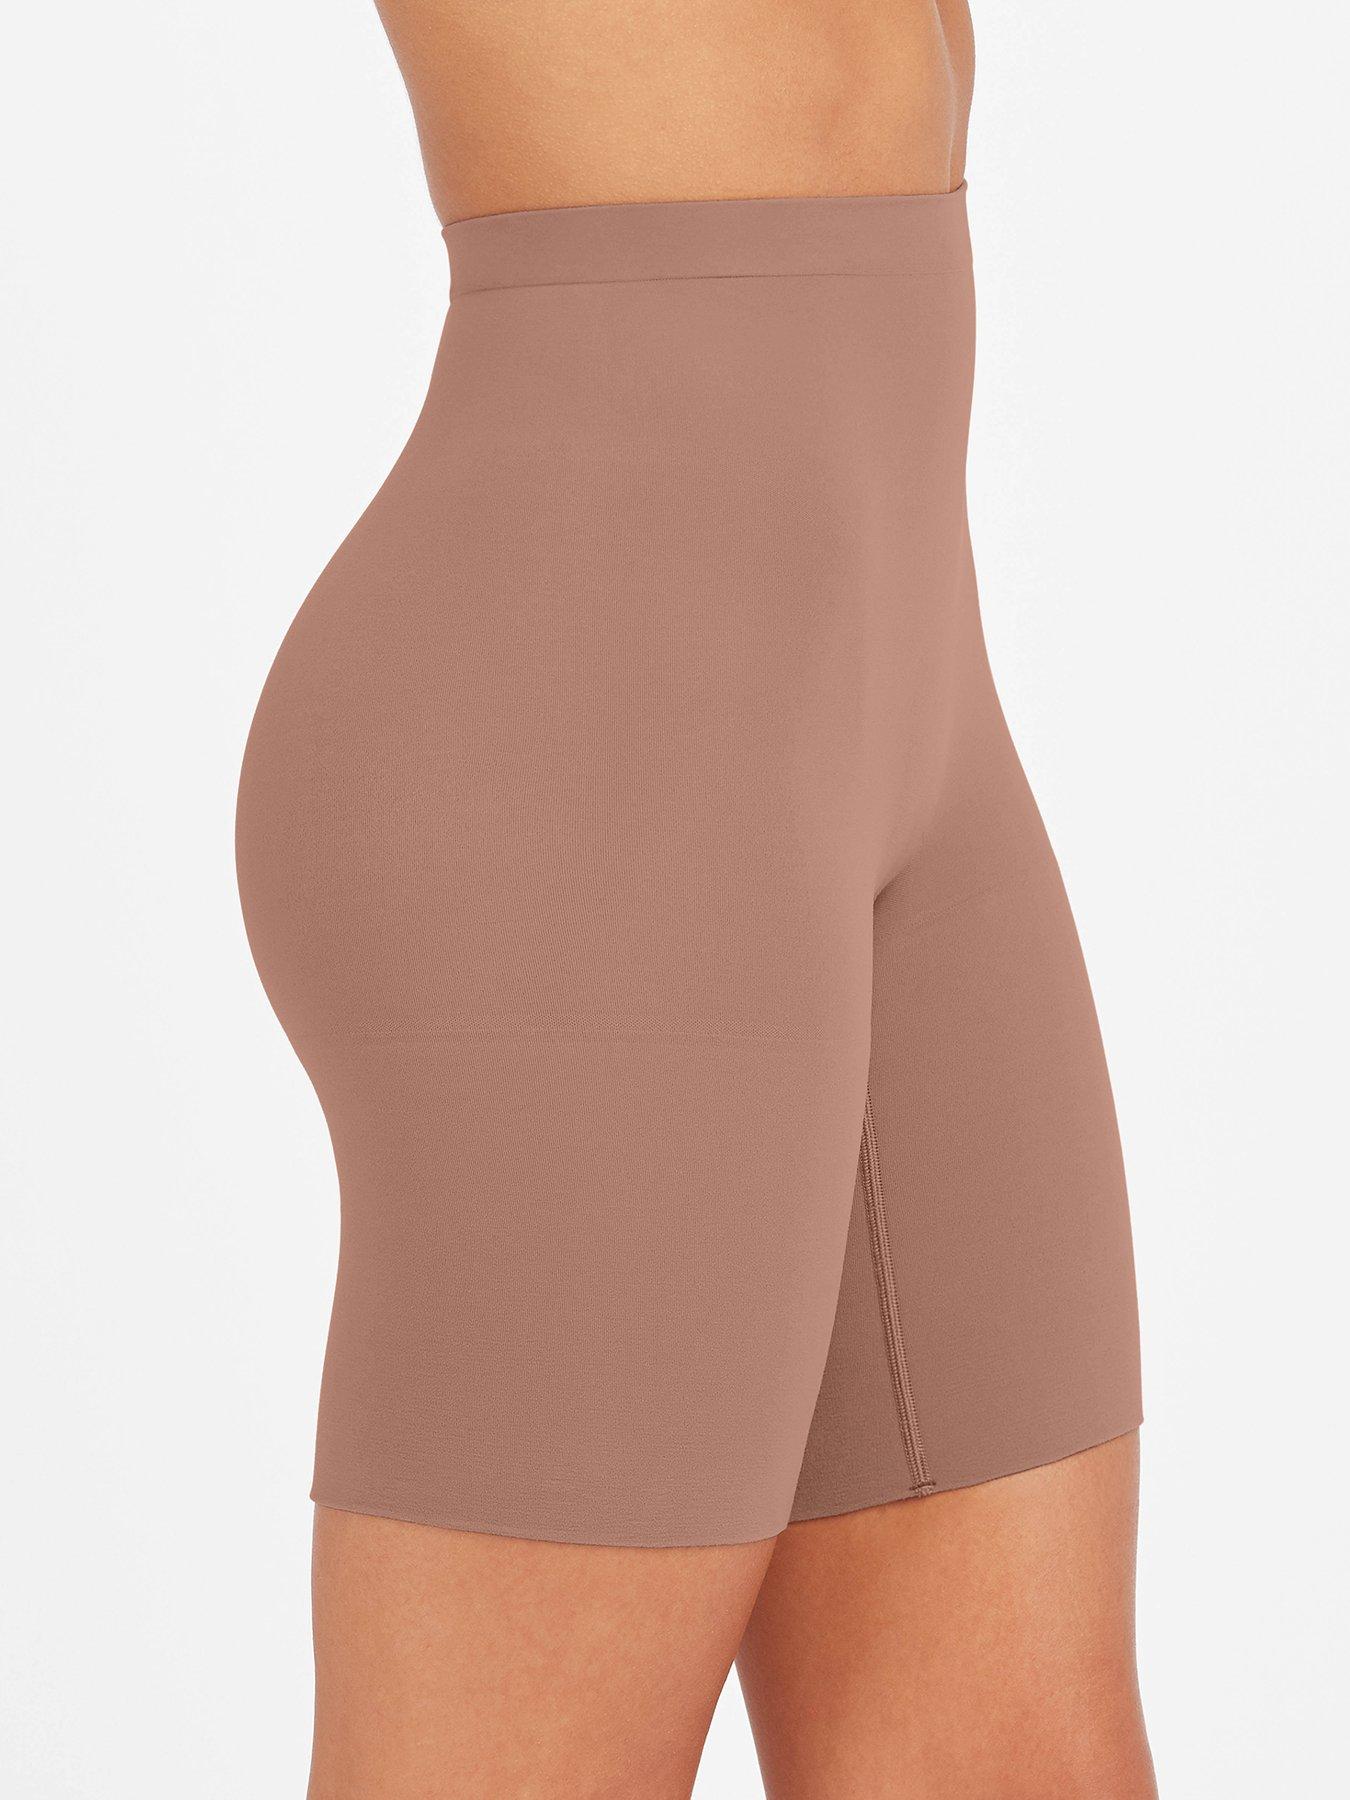 SPANX, Power Short (3-Pack), Soft Nude, XL